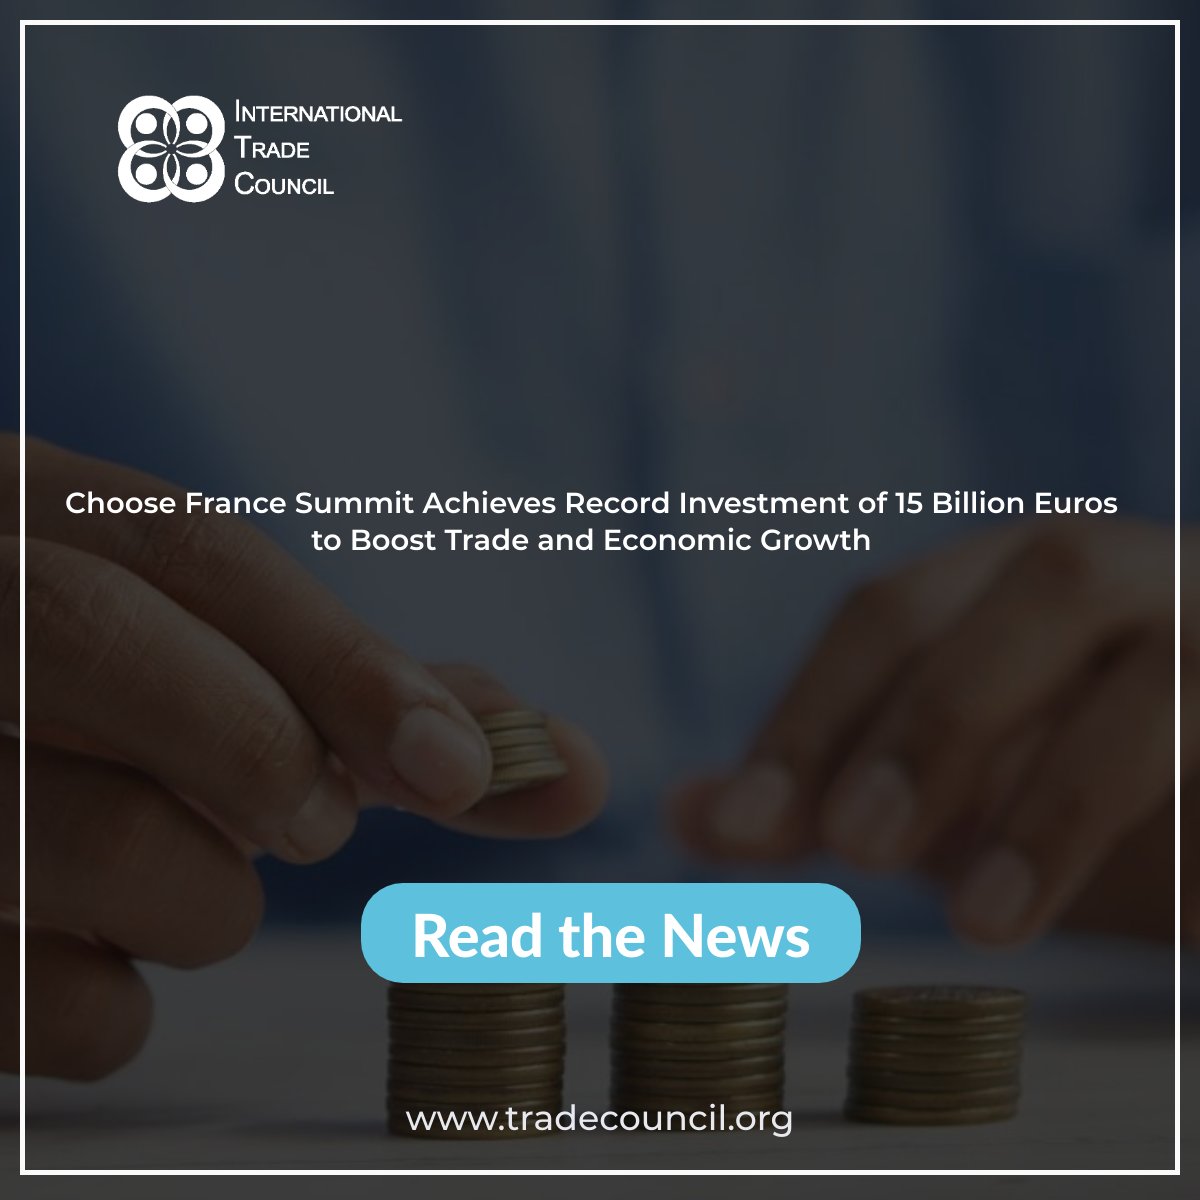 Choose France Summit Achieves Record Investment of 15 Billion Euros to Boost Trade and Economic Growth
Read The News: tradecouncil.org/choose-france-…
#ITCNewsUpdates #BreakingNews #TradeInvestmentNews #EconomicGrowth #GlobalTrade #InvestInFrance #BusinessInnovation